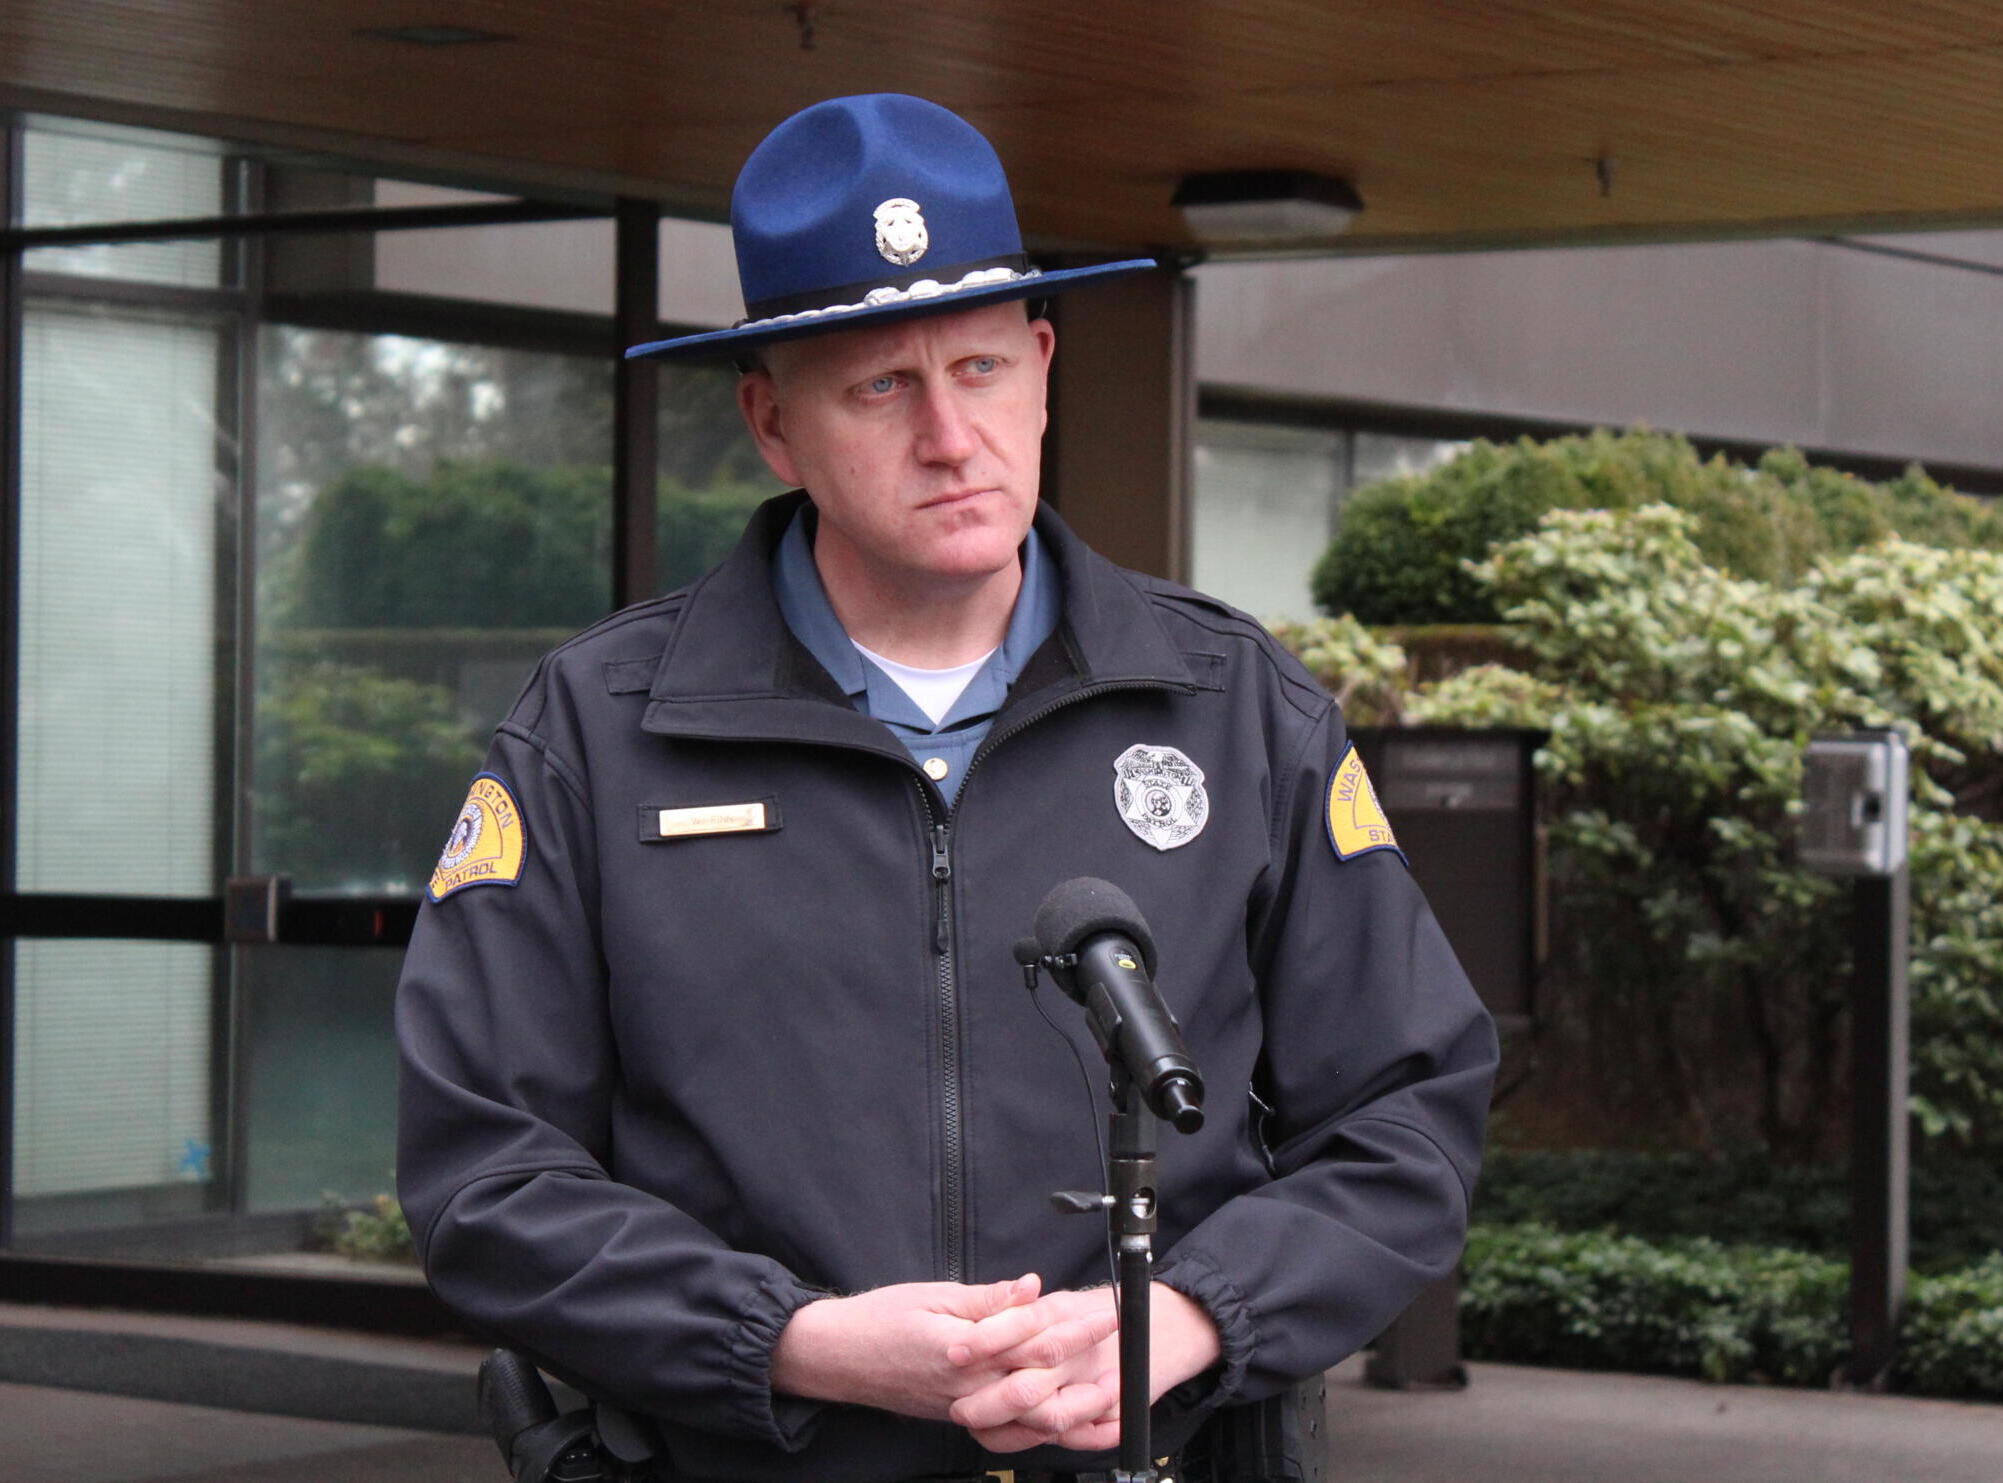 Washington State Patrol Trooper Will Finn provided an update Tuesday, at agency’s headquarters in Vancouver, on an incident involving a 45-year-old Yacolt woman who jumped out of a Clark County sheriff’s deputy’s vehicle as it traveled southbound on Interstate 5 near Ridgefield. The woman, Sara Gottwig-Carr, is in critical condition at PeaceHealth Southwest Medical Center.